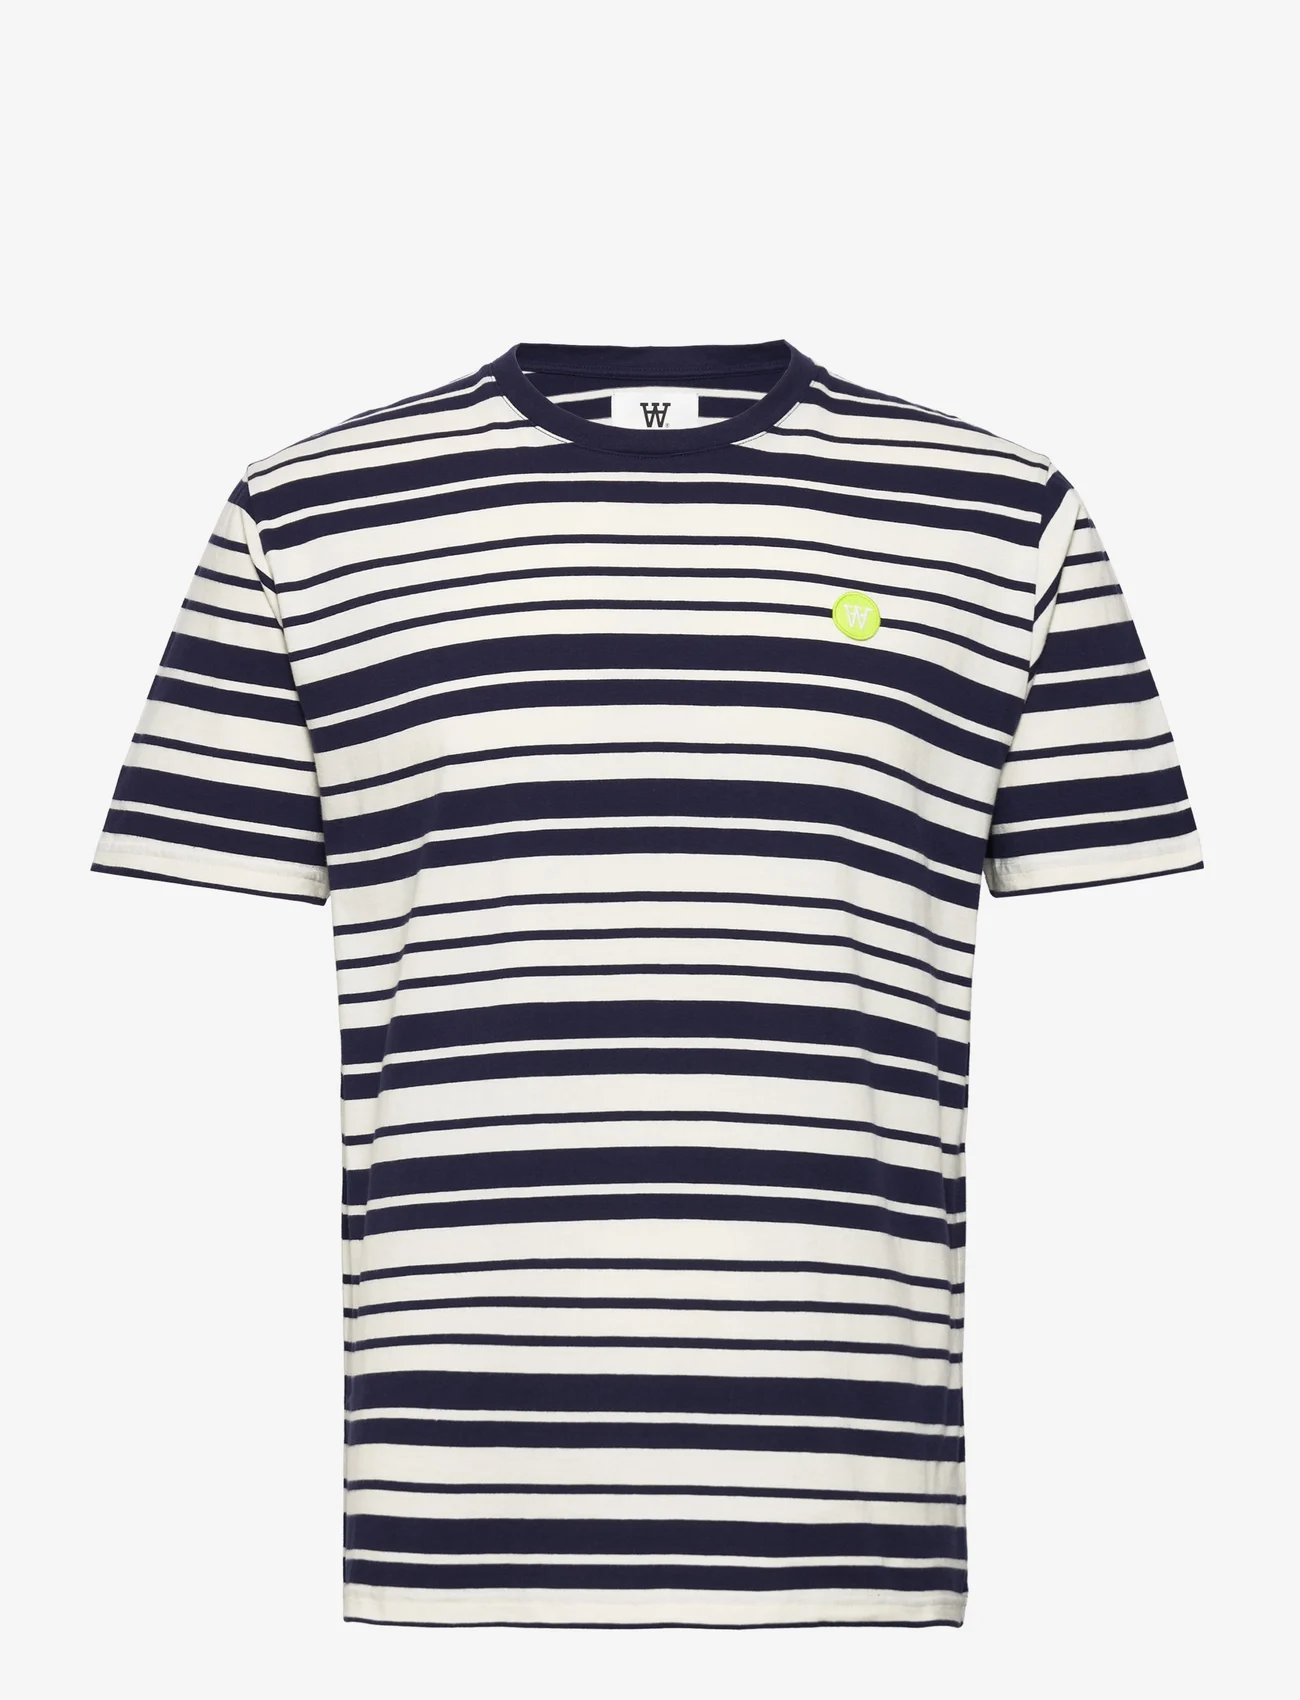 Double A by Wood Wood - Ace stripe T-shirt - short-sleeved t-shirts - off-white/navy stripes - 0